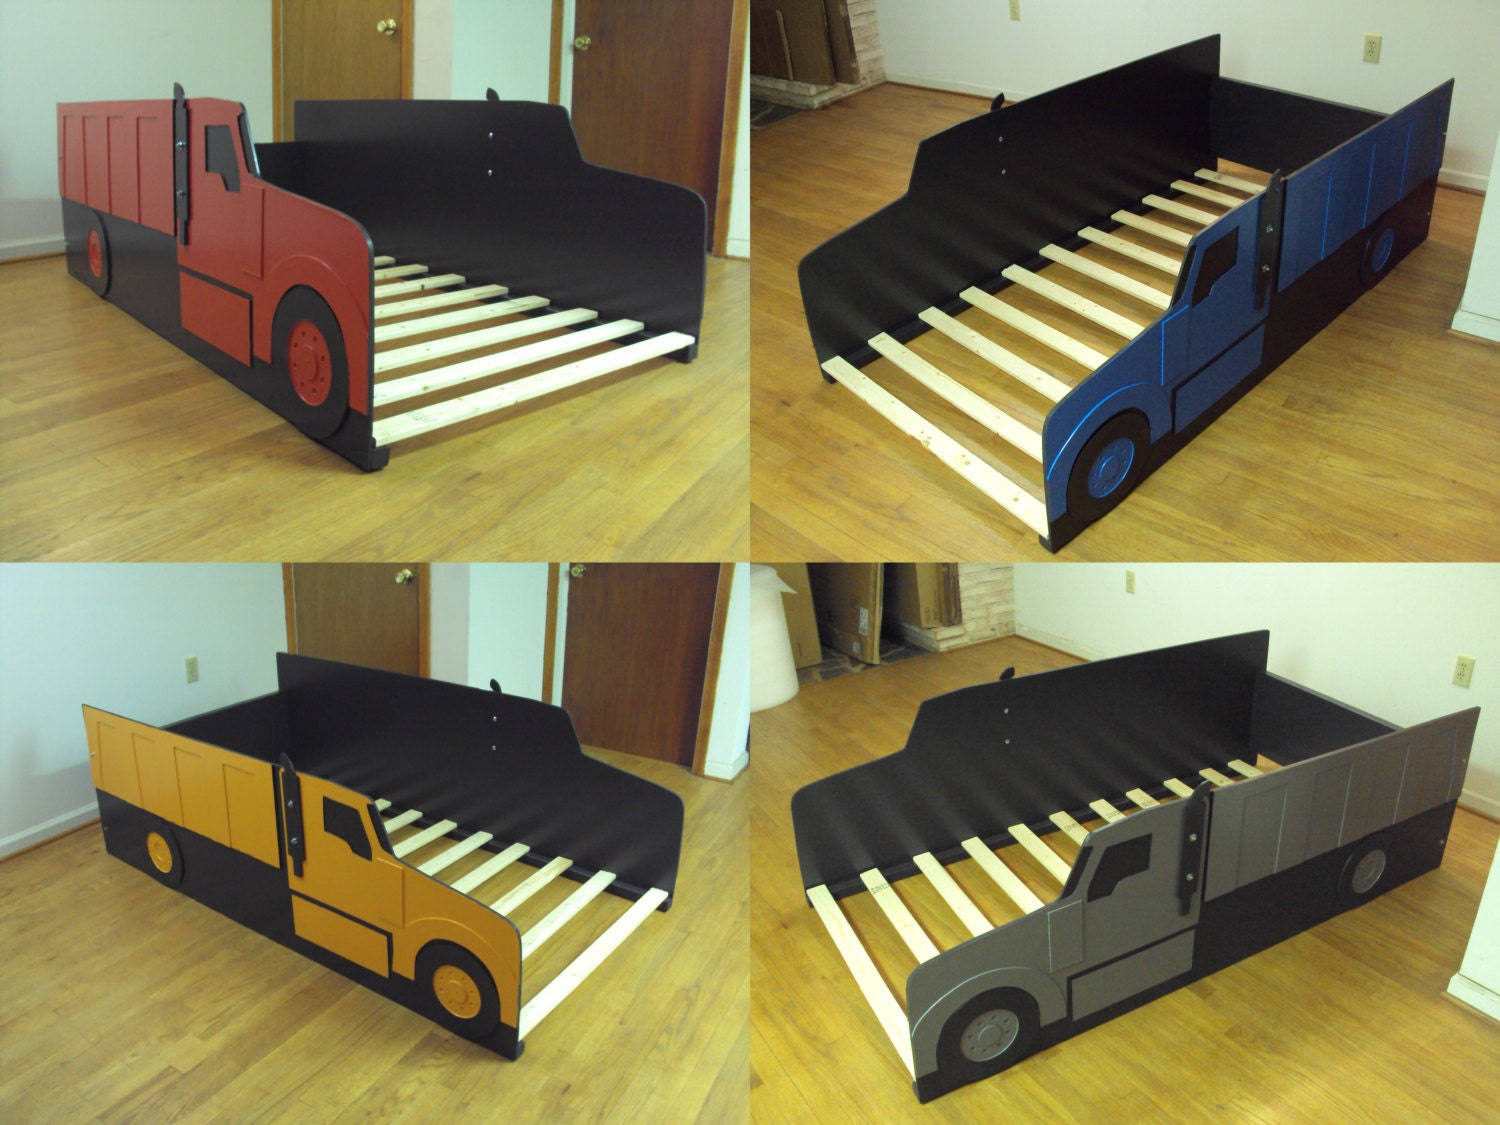 Truck twin kids bed frame handcrafted truck by TradecraftSpec